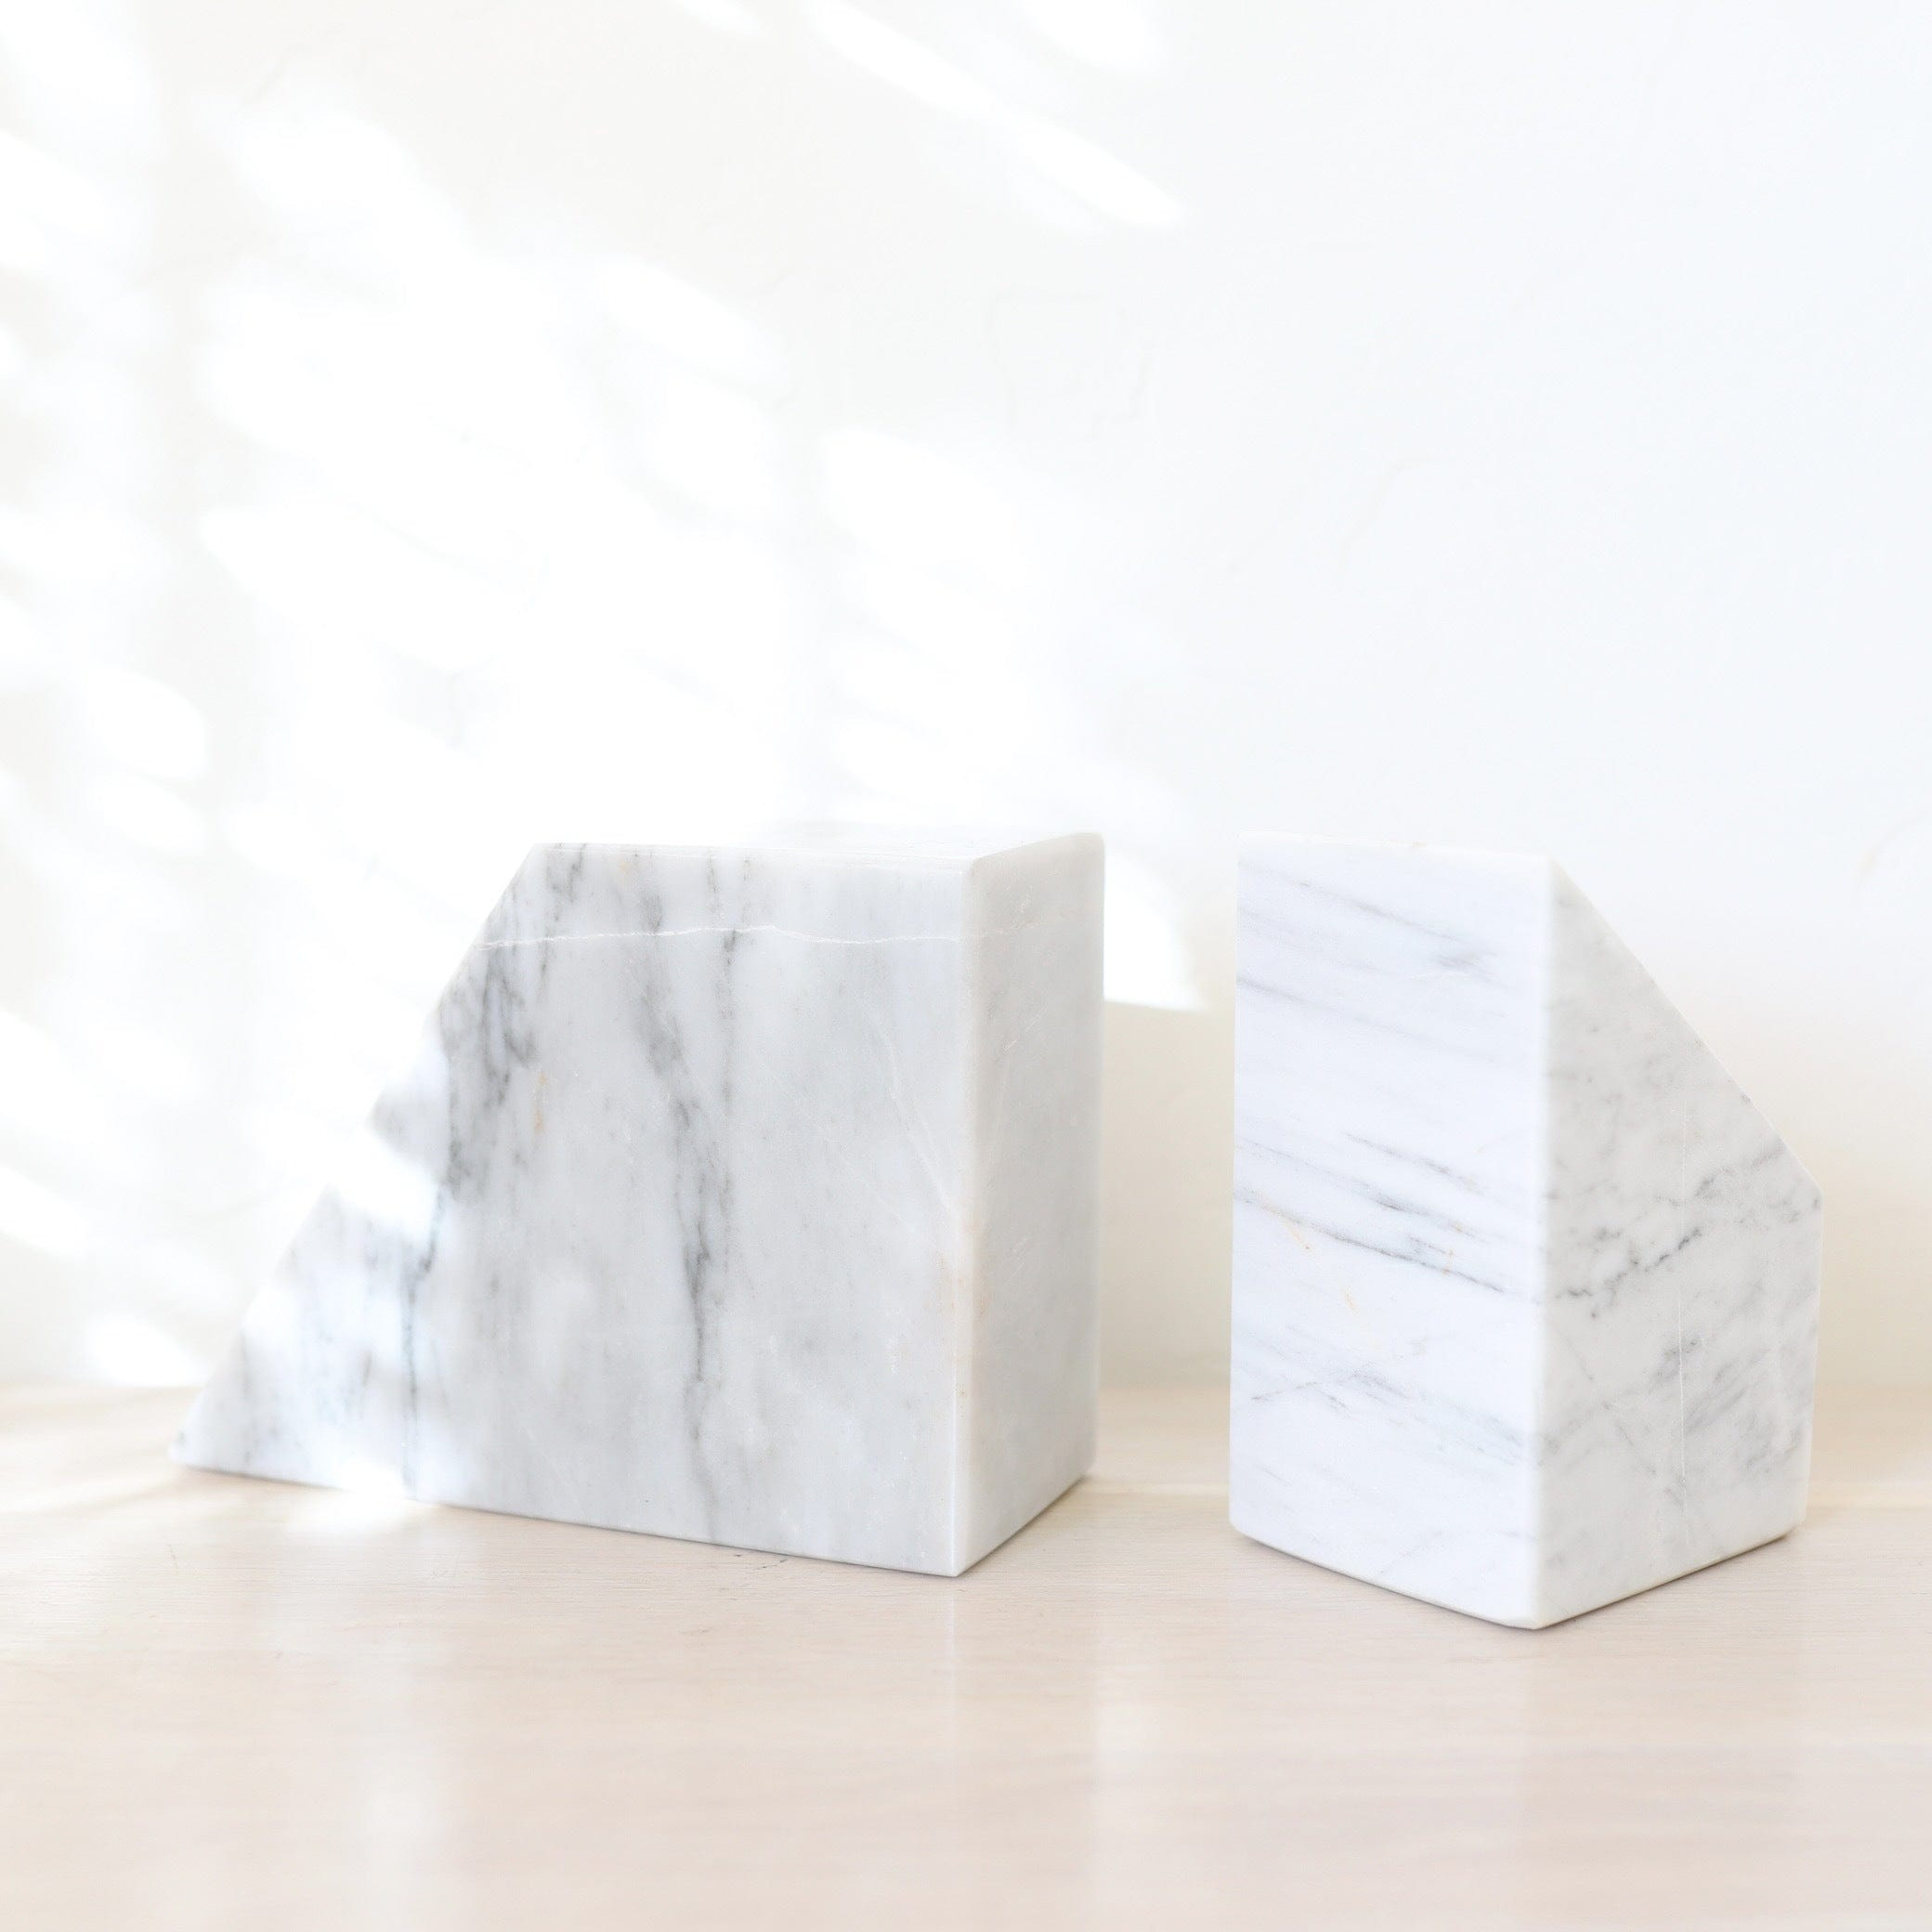 CDMX Decor White Marble Bookends | CURBSIDE PICKUP ONLY